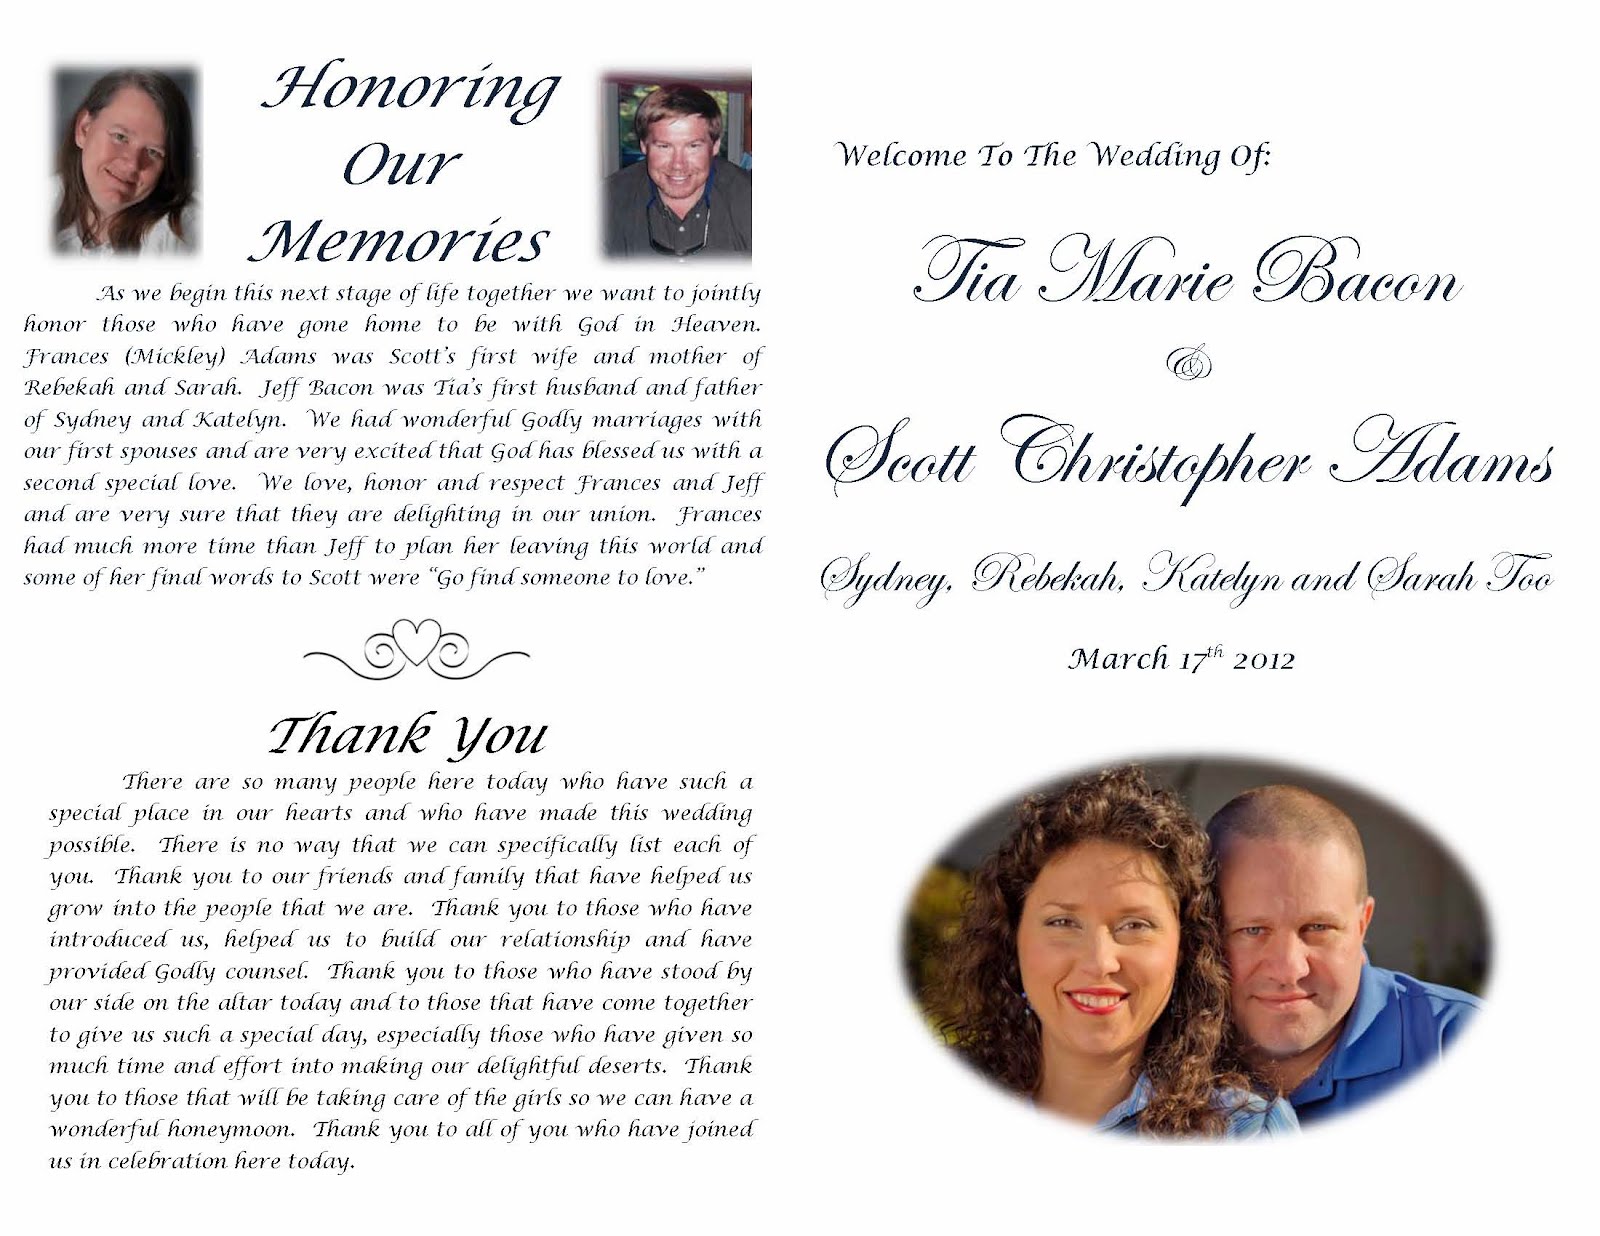 Wedding Program Thank You Message From Bride And Groom